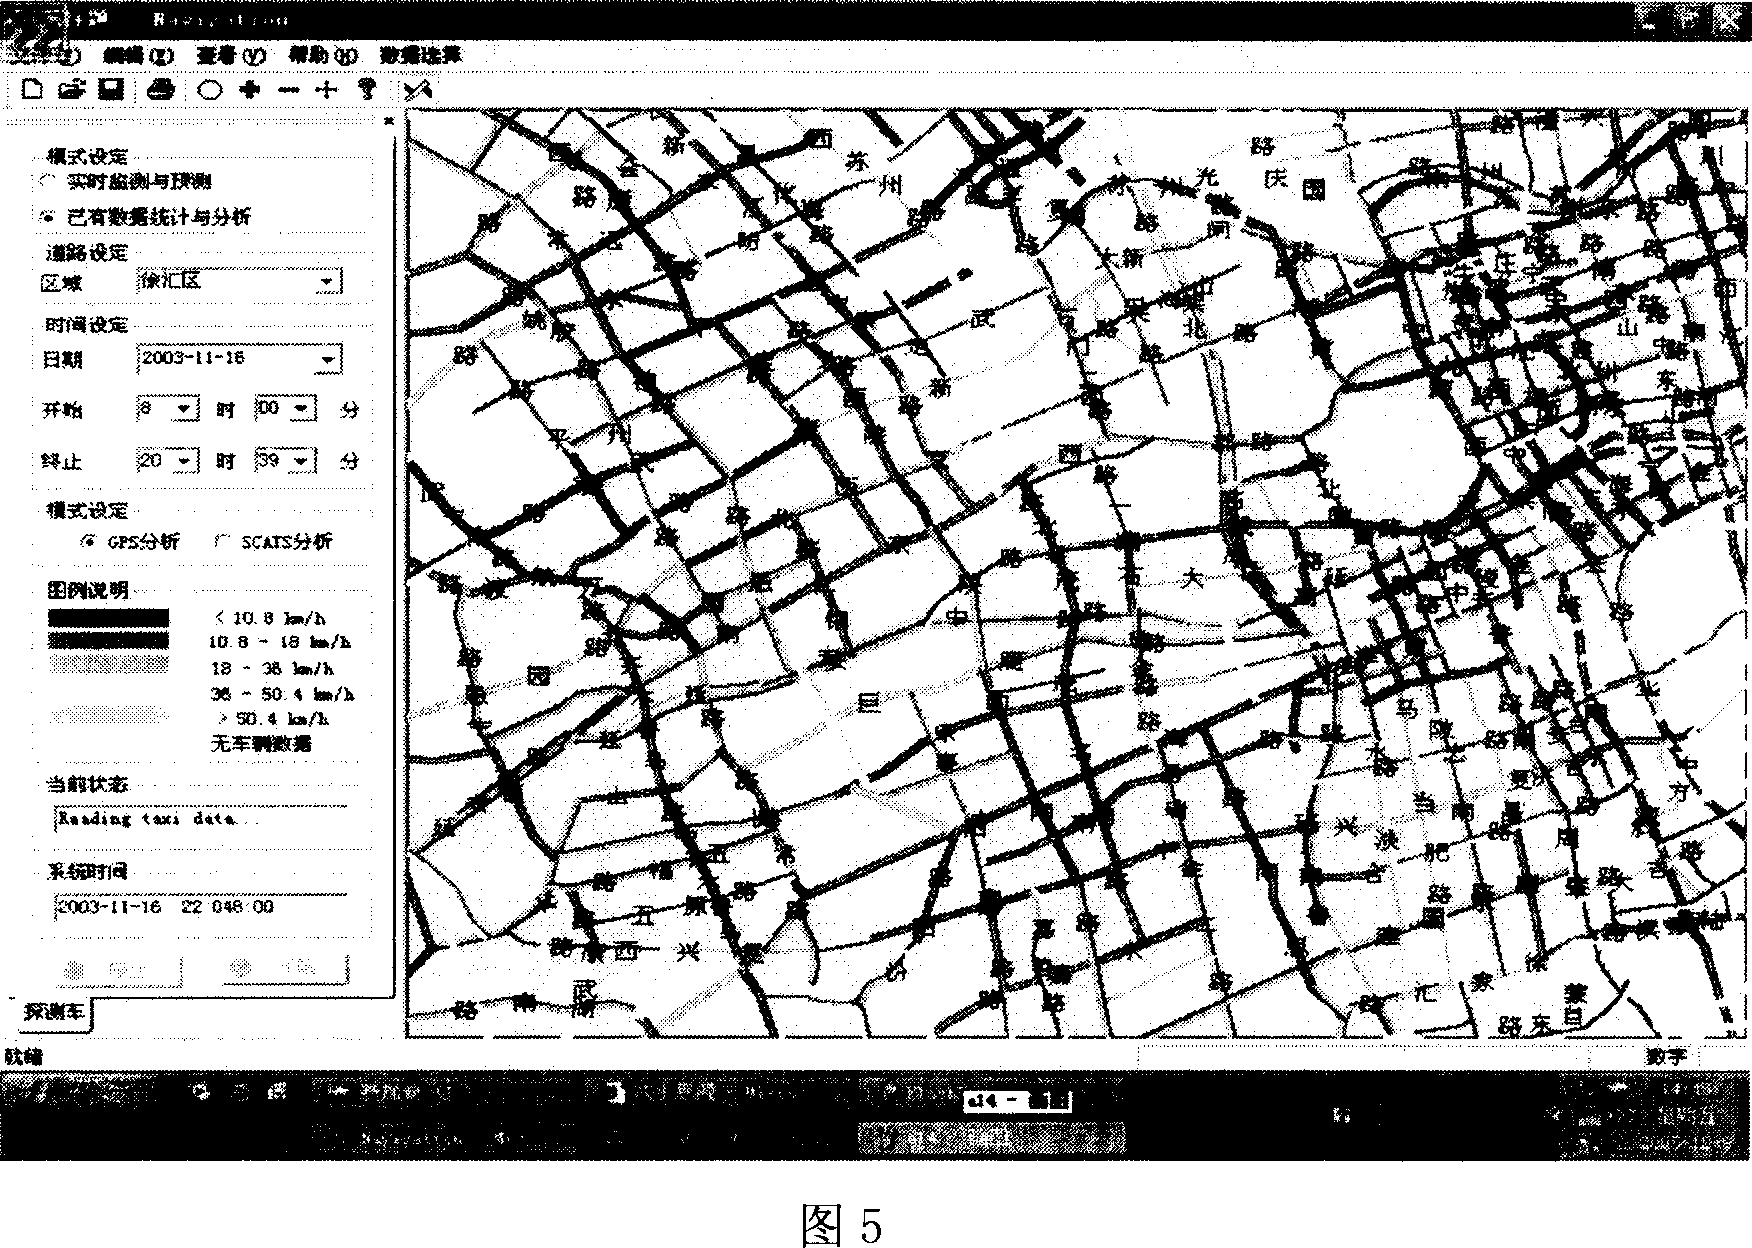 Method for obtaining everage speed of city road section traffic flow